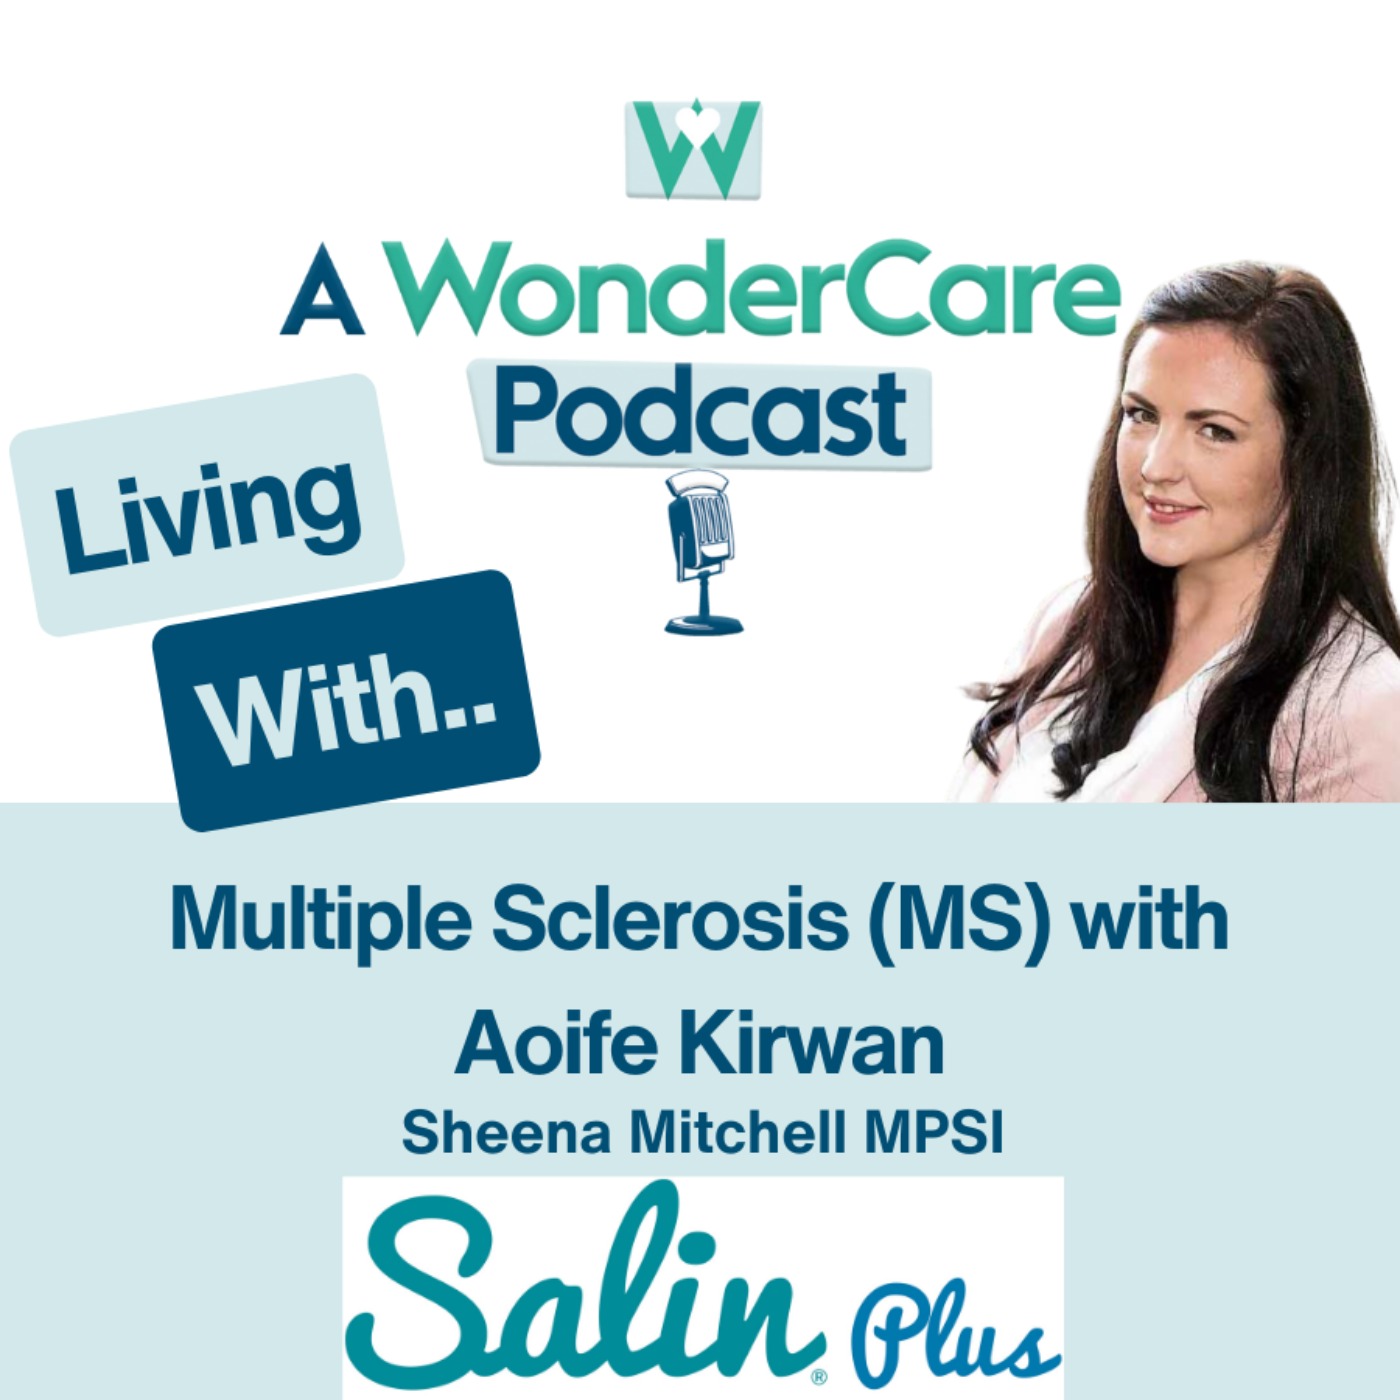 Living with Multiple Sclerosis (MS) with Aoife Kirwan